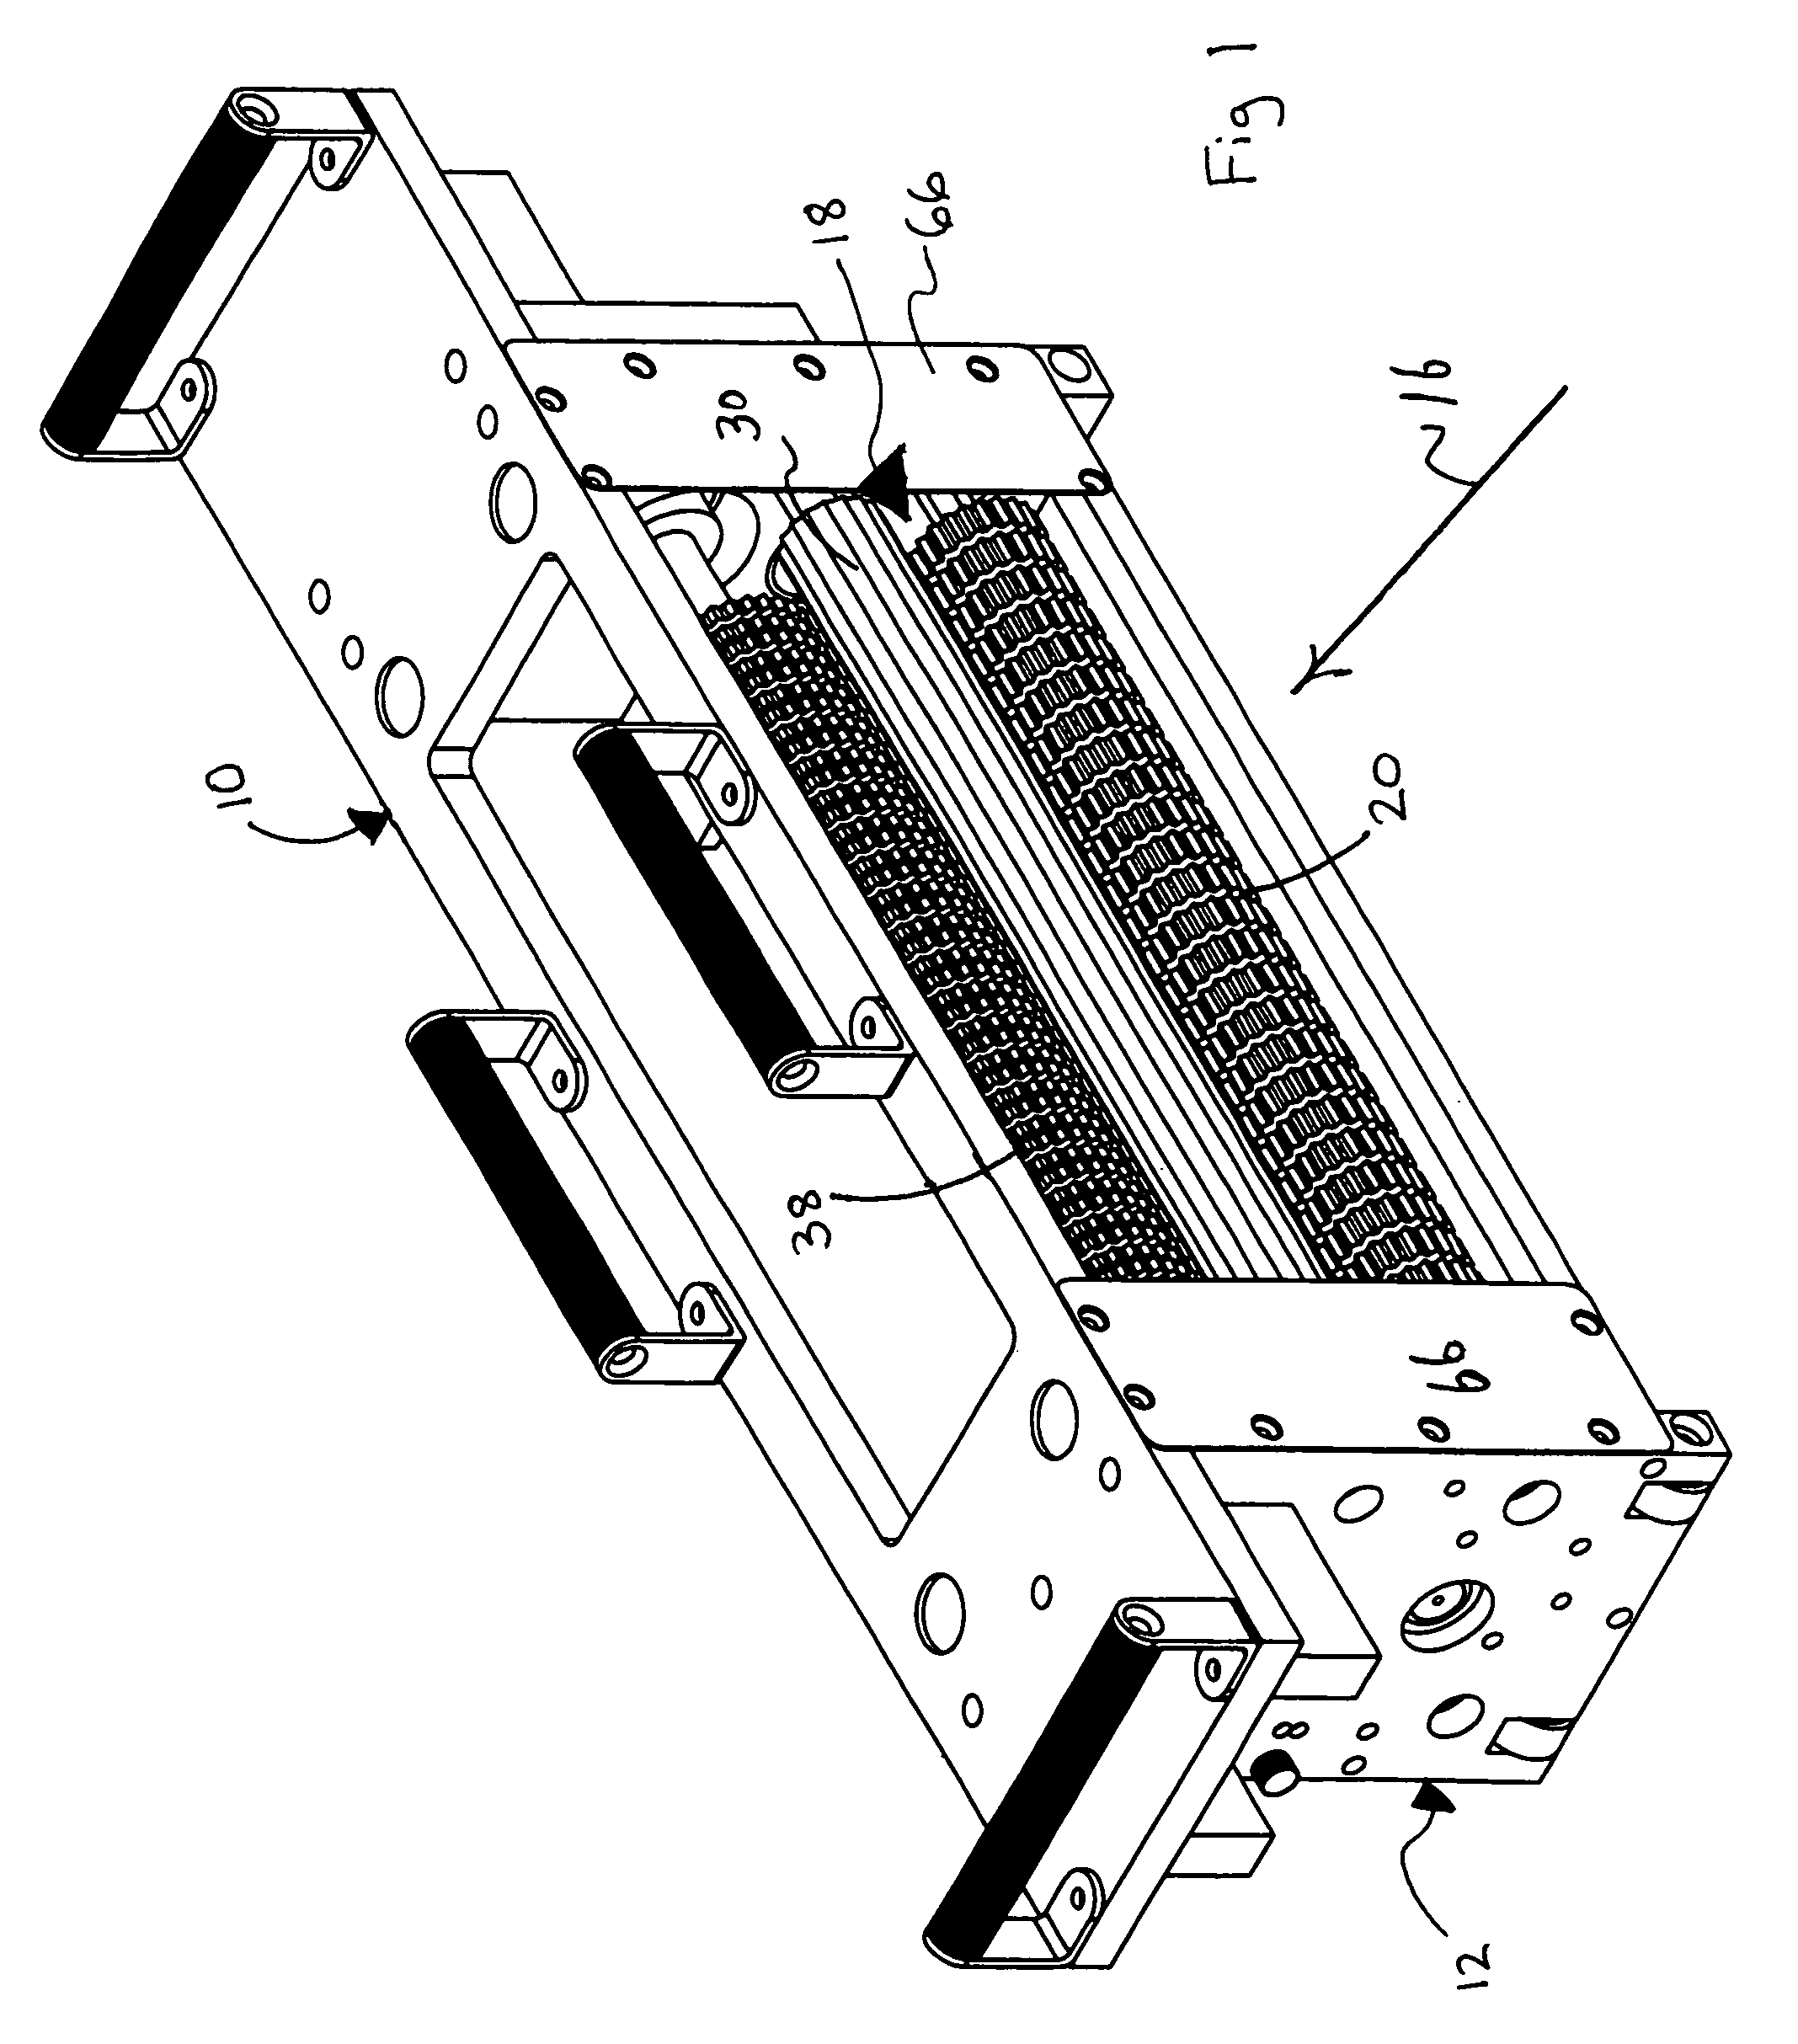 Meat cutting assembly